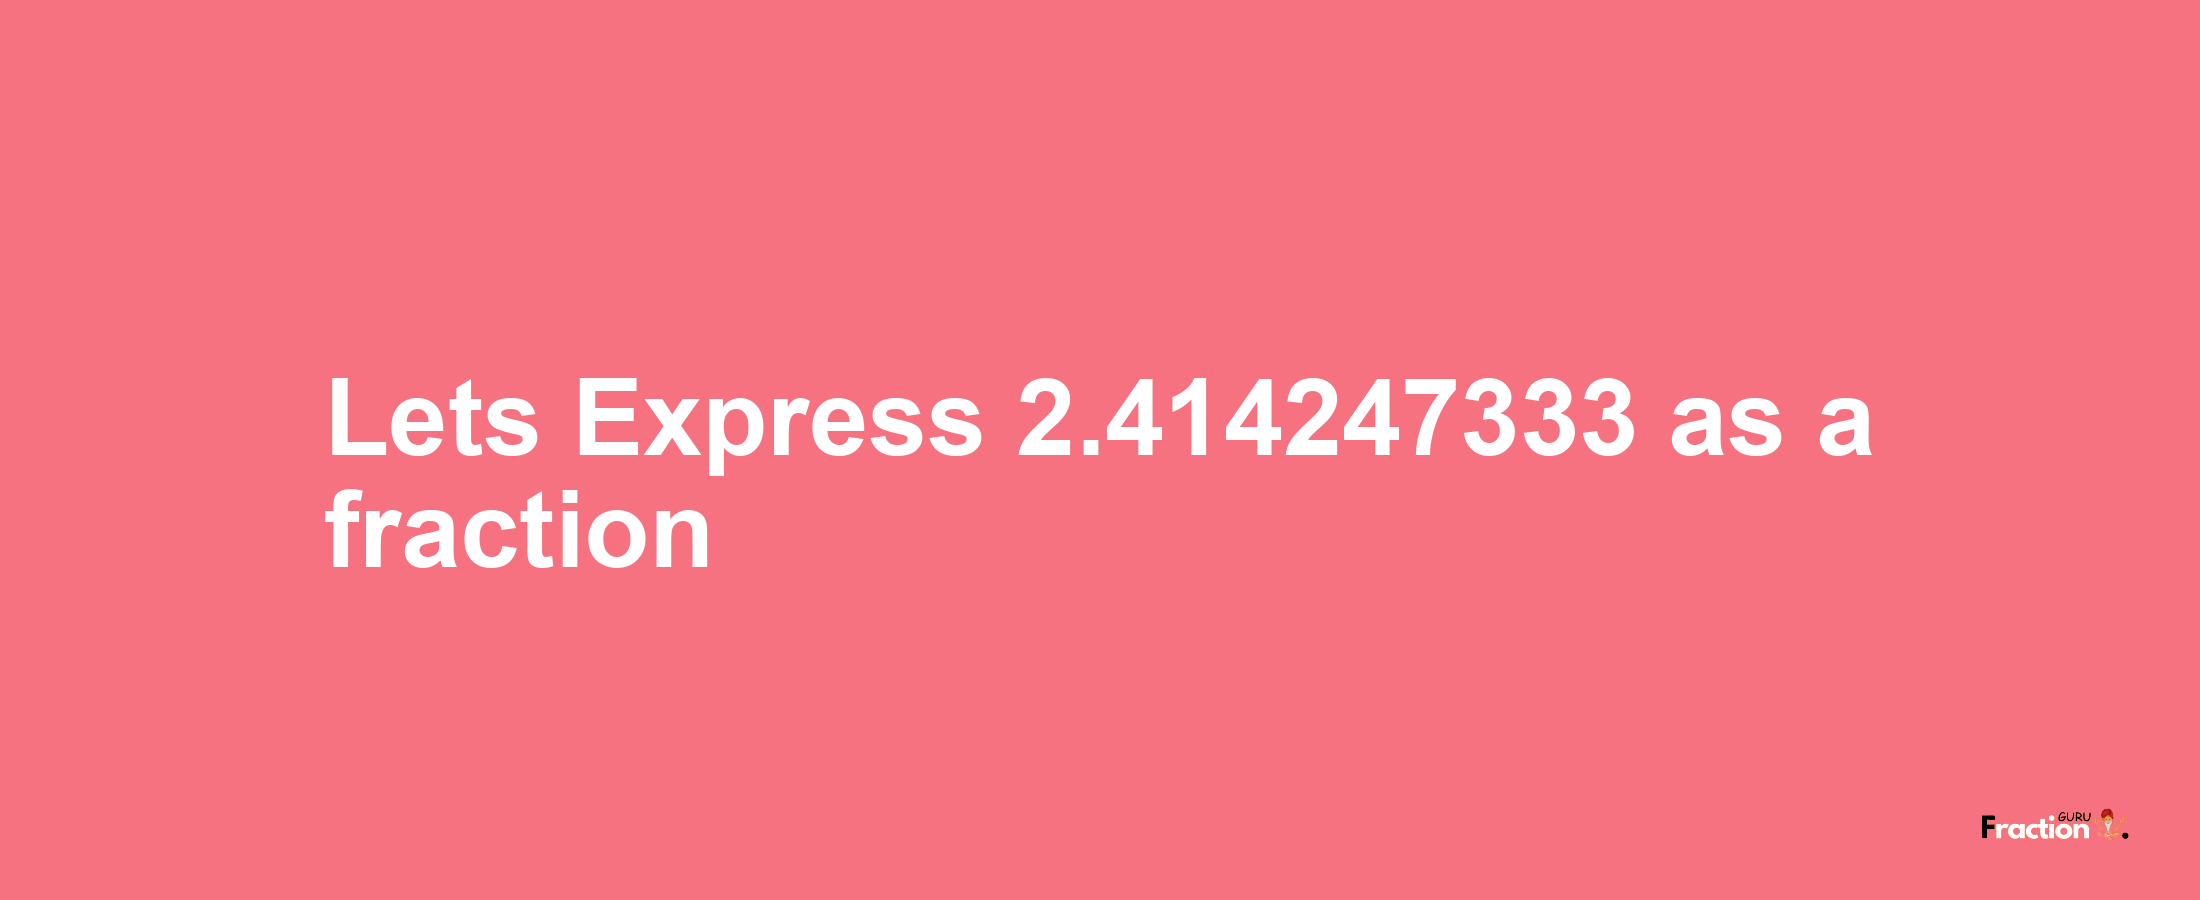 Lets Express 2.414247333 as afraction